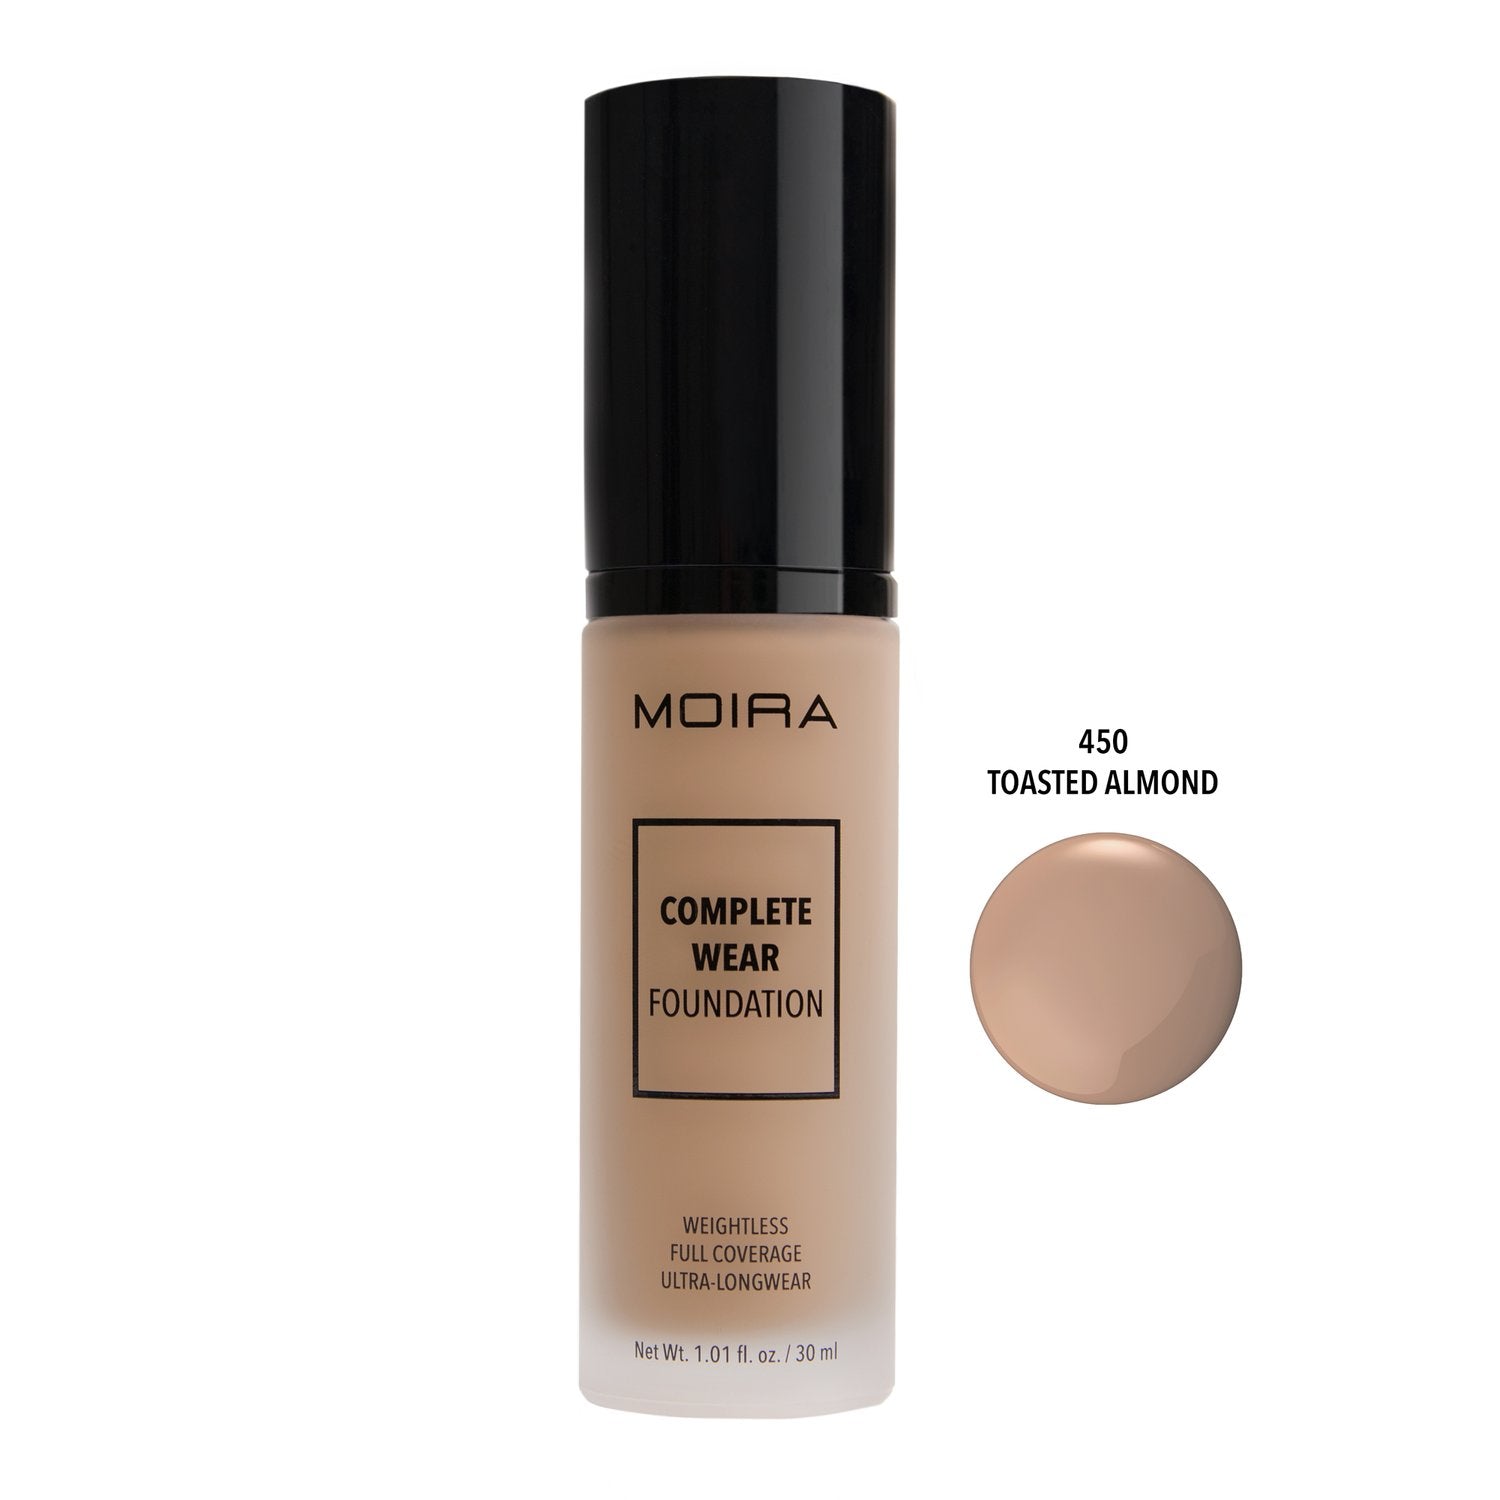 Complete Wear Foundation by Moira Cosmetics